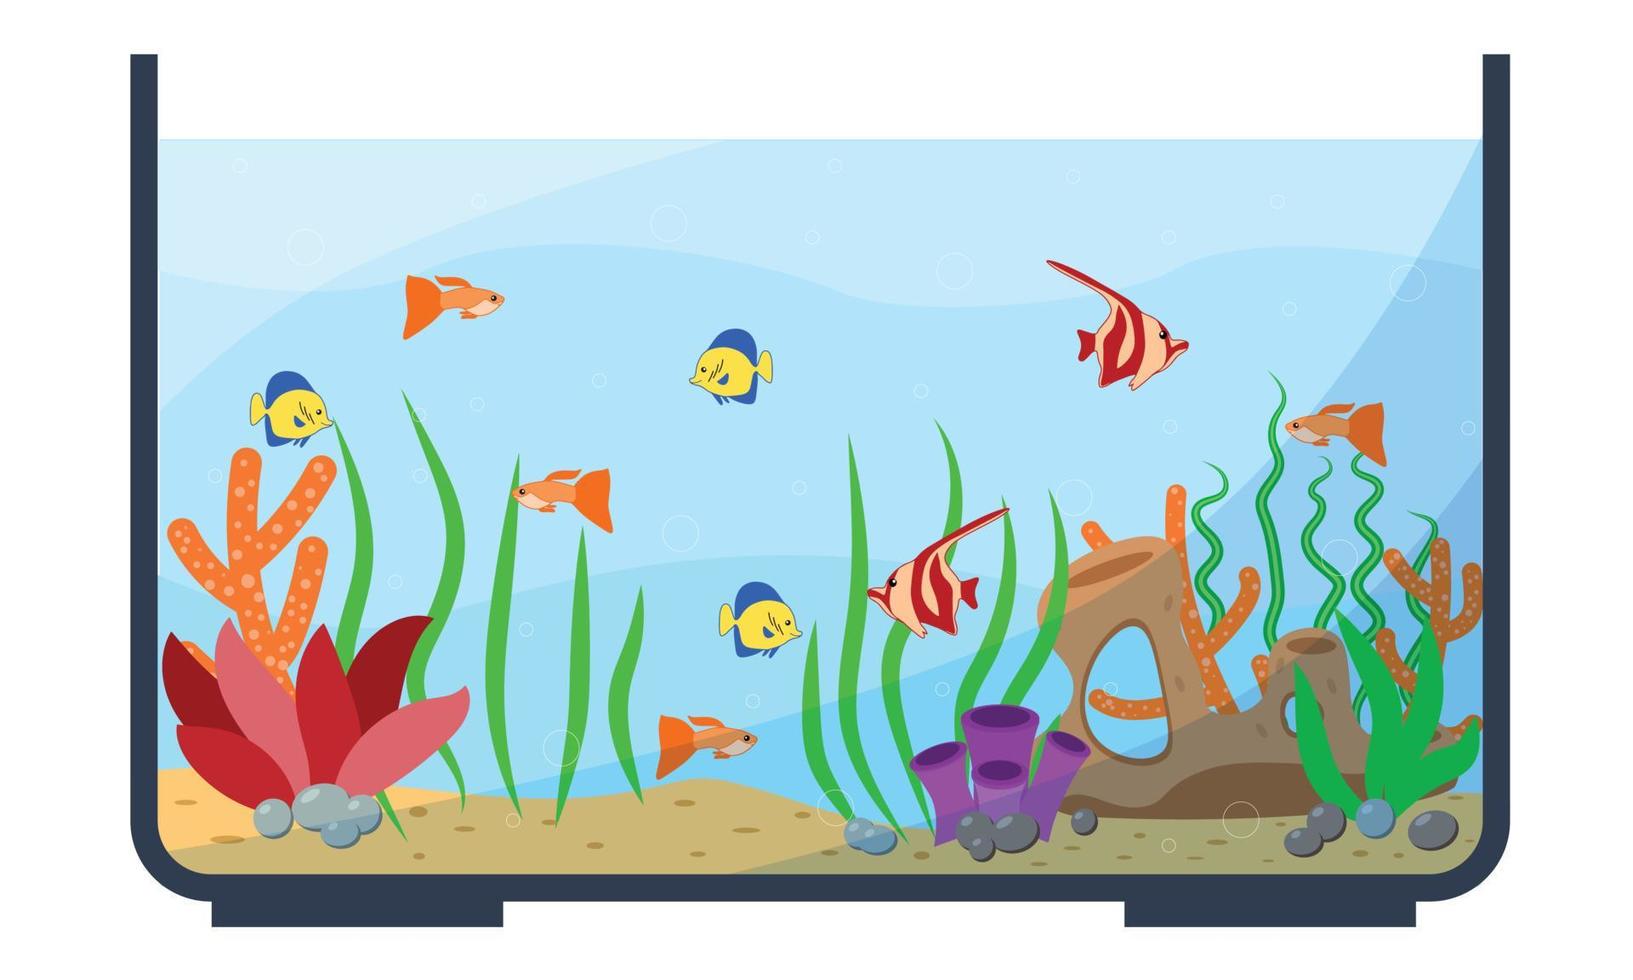 Glassware aquarium with exotic tropical fishes. Fish tank with emperor and golden fish, swimming angelfish, domestic discus and coral, vivarium. Underwater life and nature theme vector